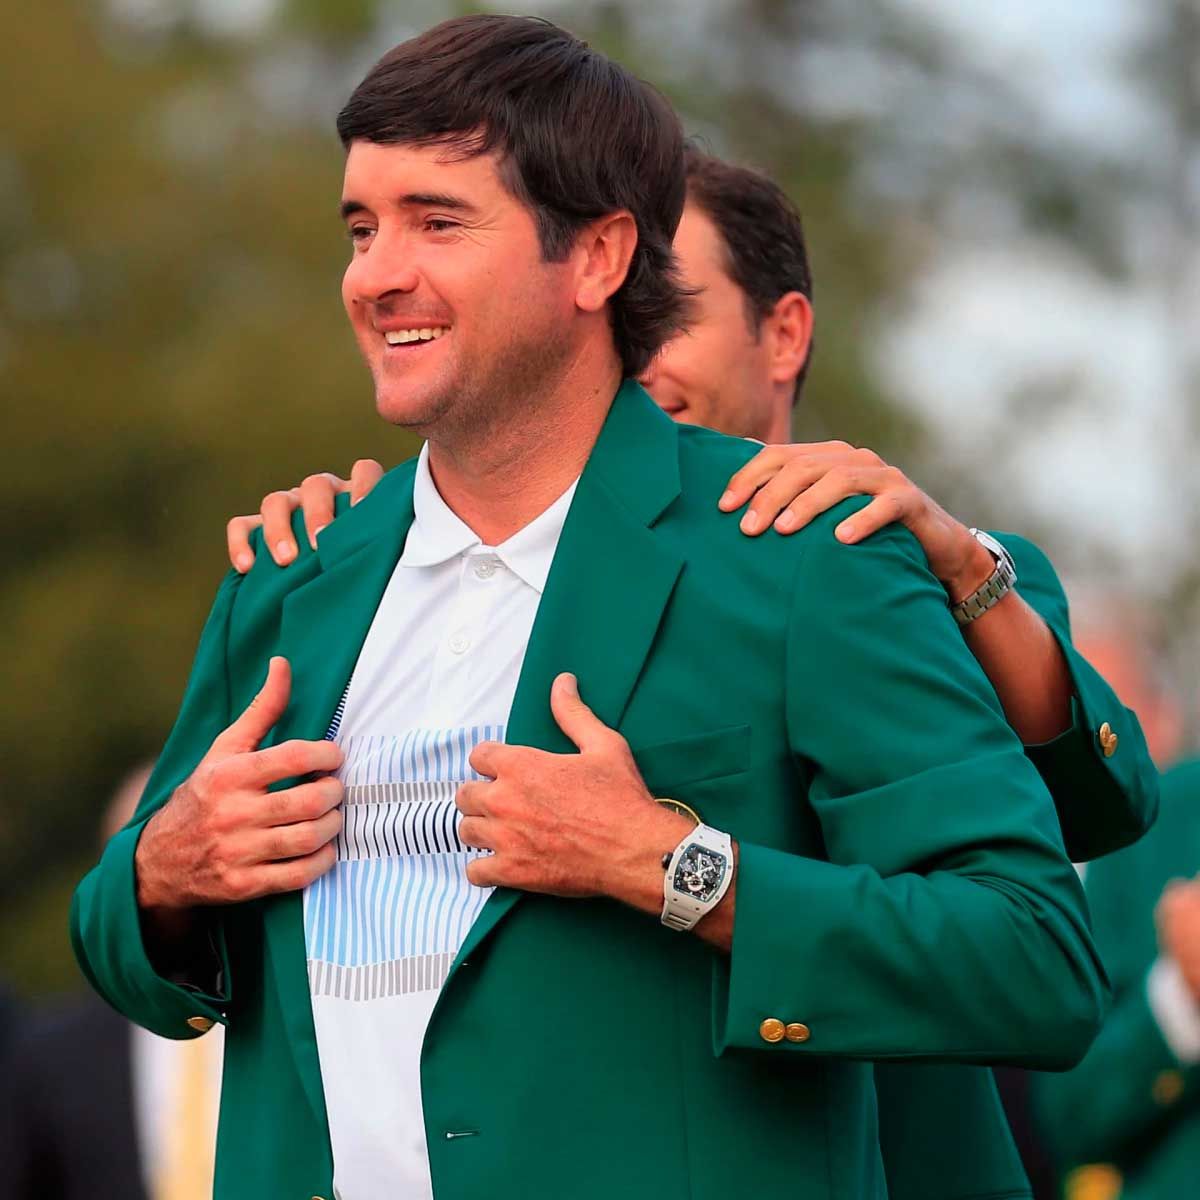 Bubba Watson cliched the green jacket first in 2012 and a second time in 2014, here on his wrist is the Richard Mille Tourbillon RM 038 Bubba Watson (Image: richardmille.com)